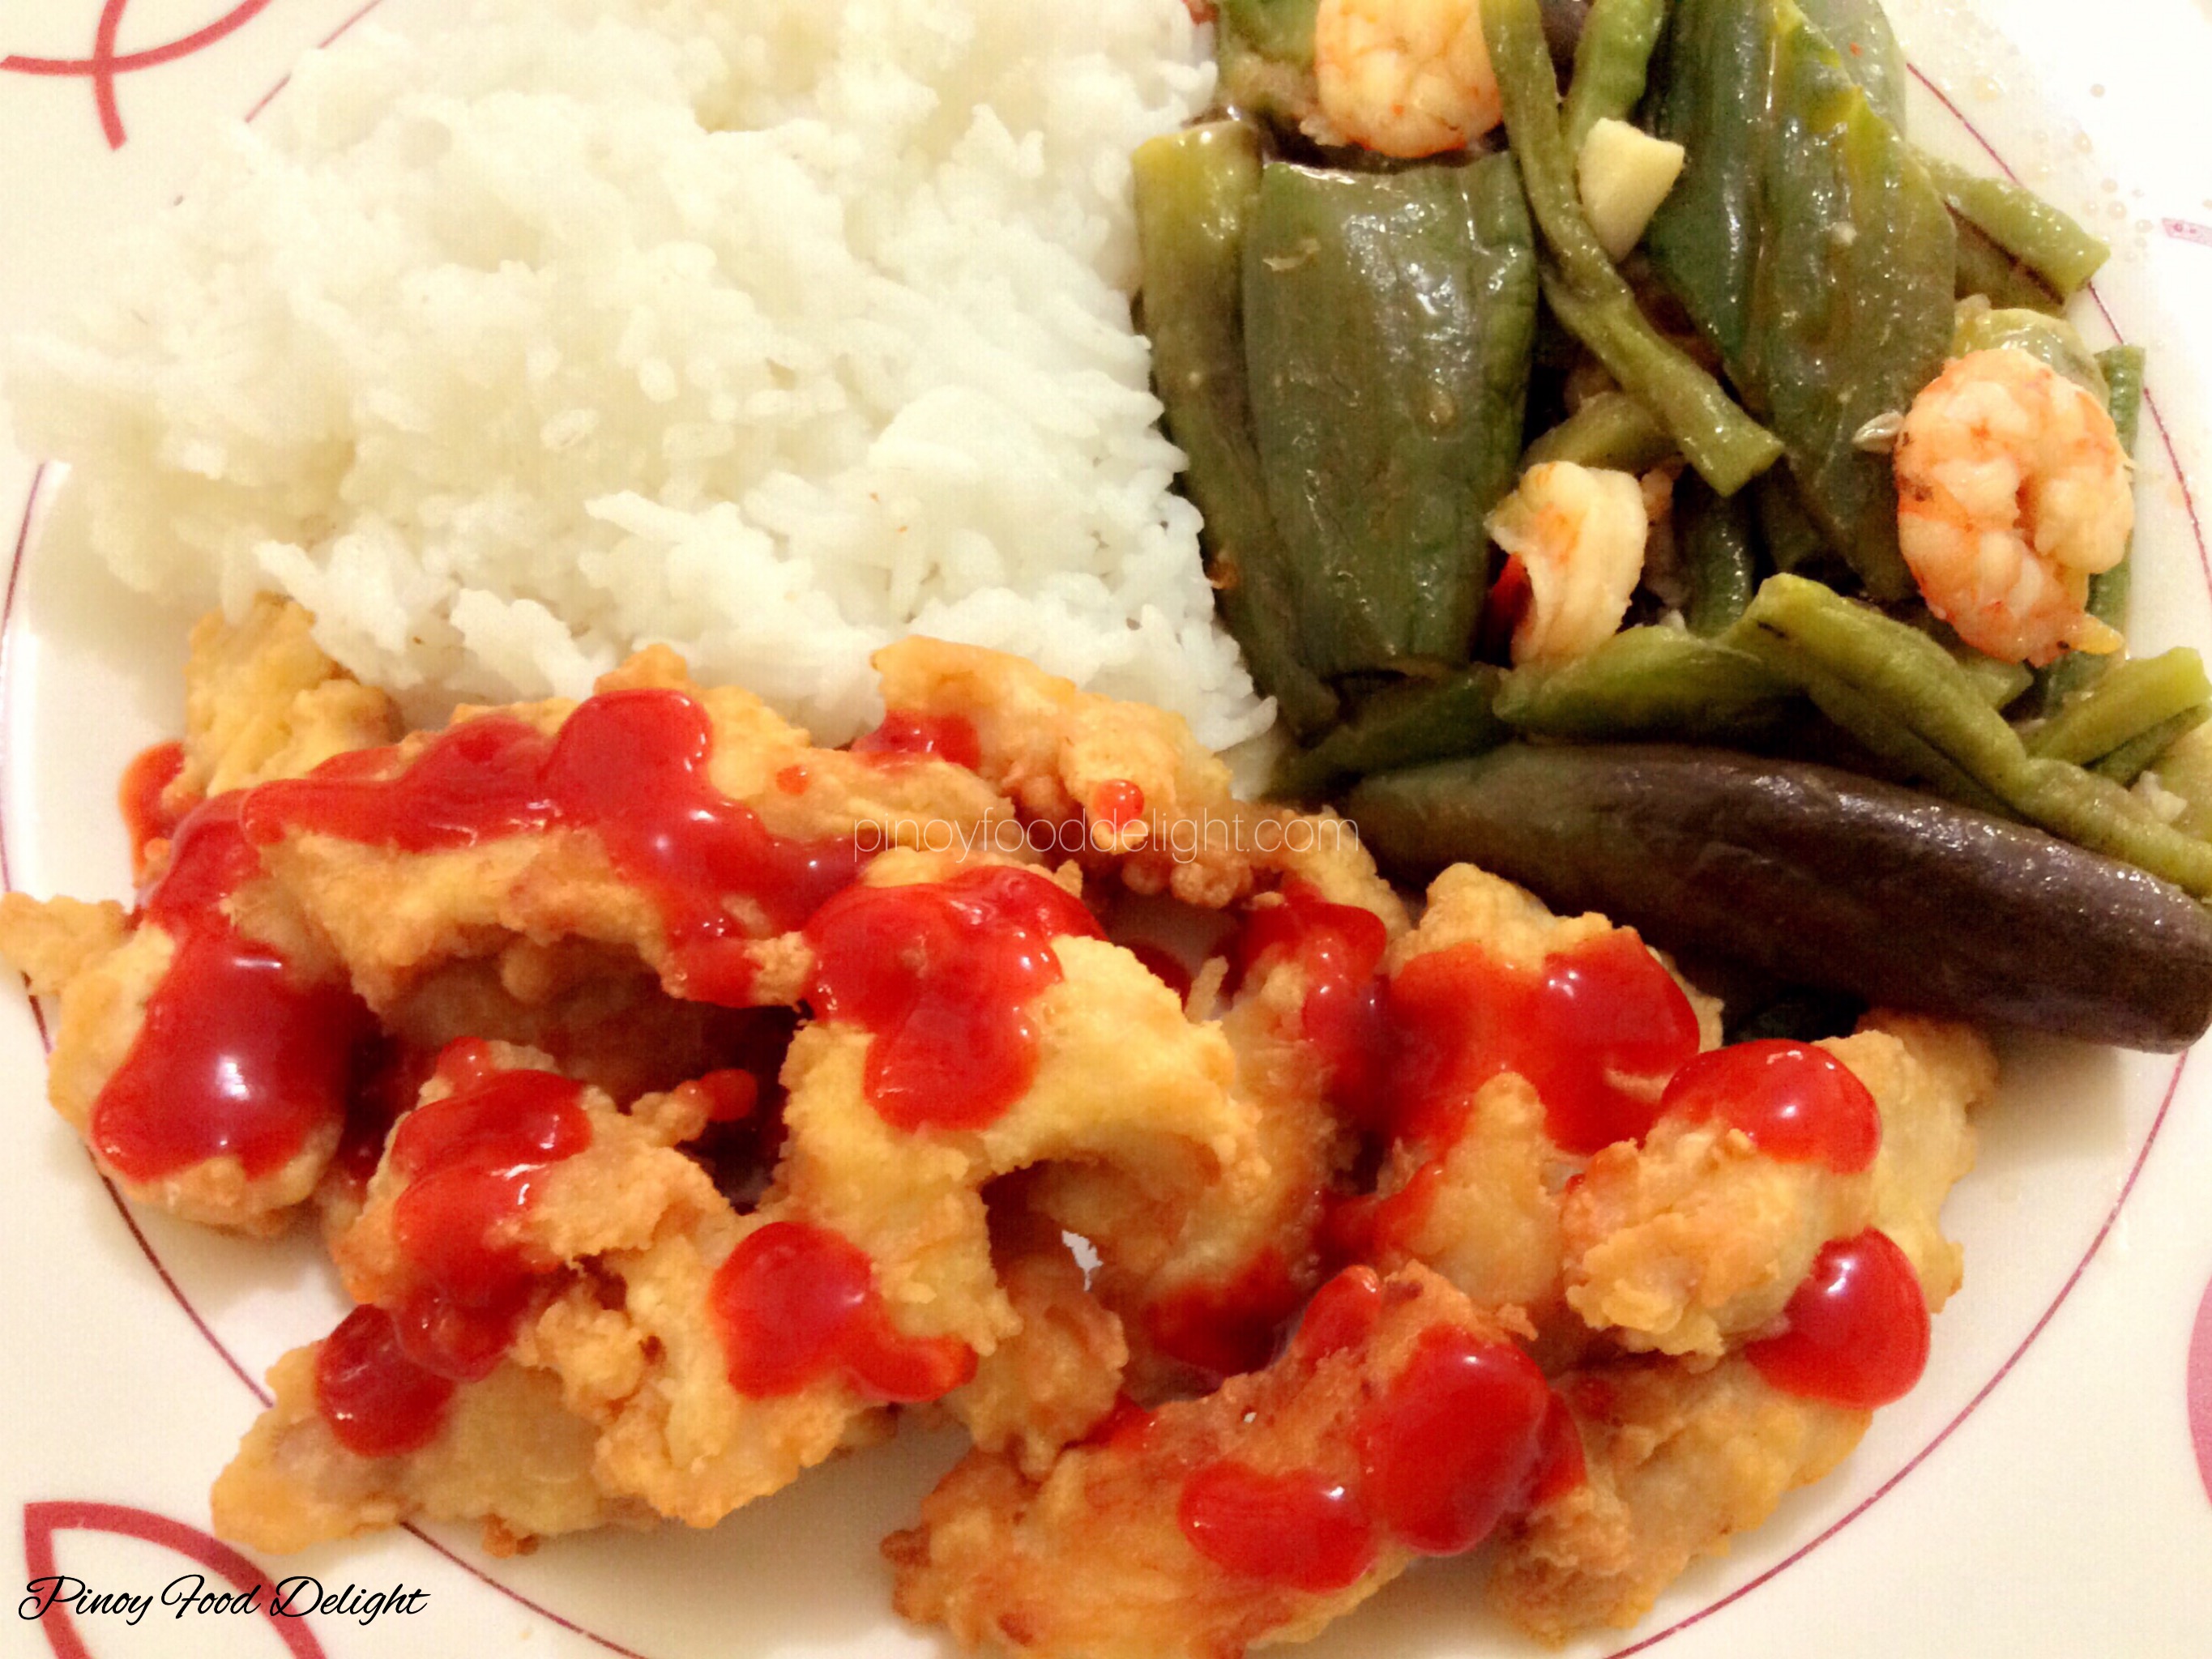 Chicken Fillet With Rice And Veggies Pinoy Food Delight